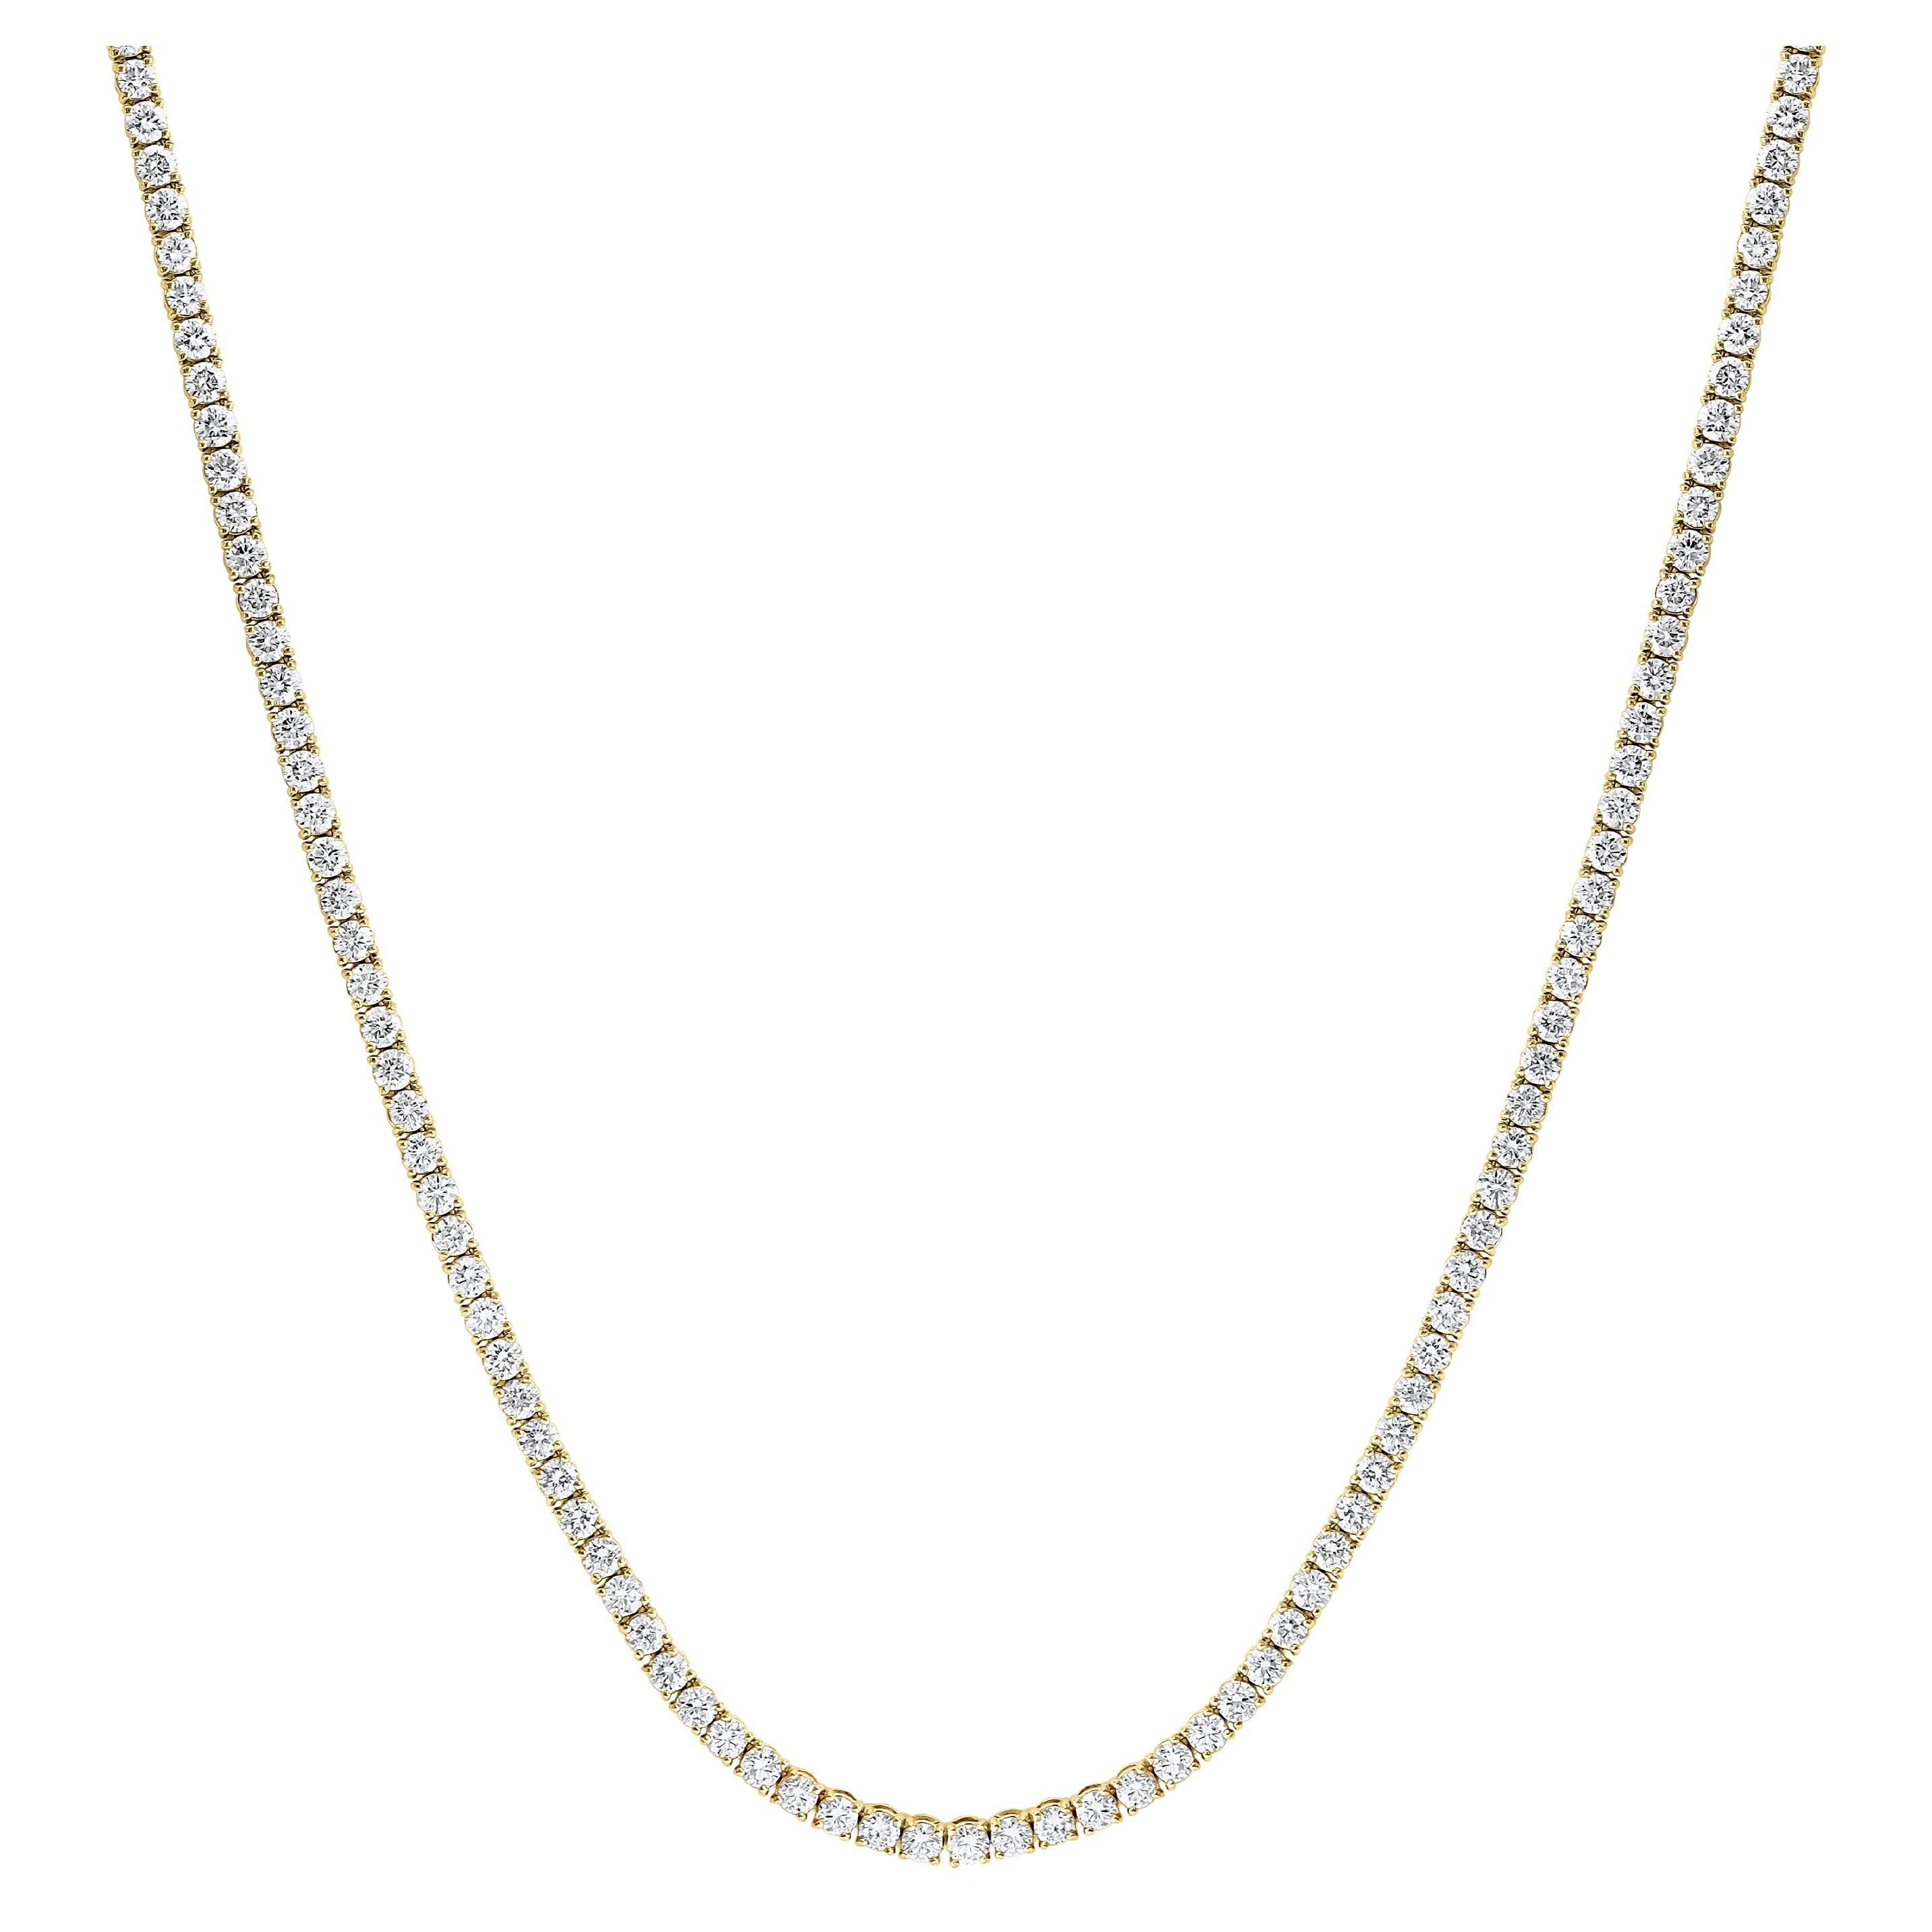 8.37 Carat Diamond Tennis Necklace in 14K Yellow Gold For Sale